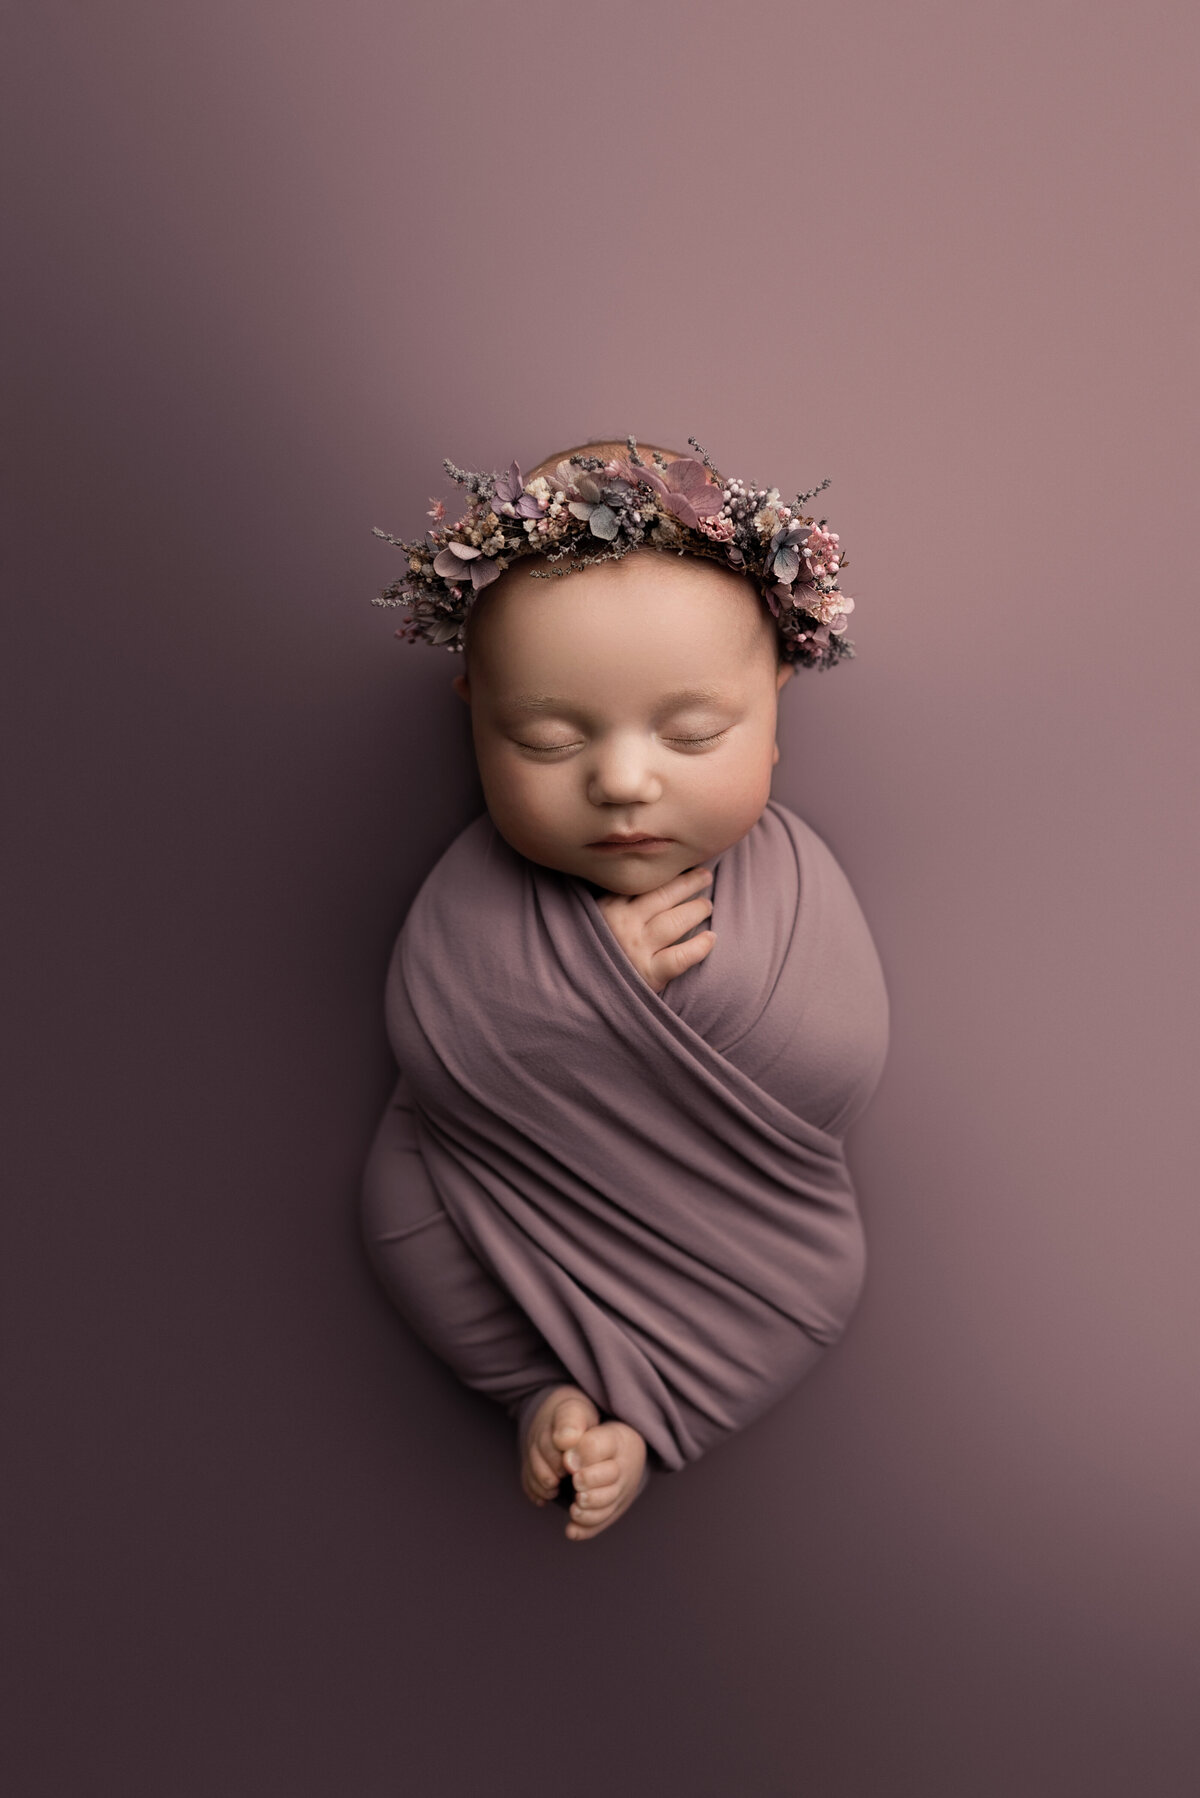 Main Line's best newborn photographer Katie Marshall captures an aerial image of a sleeping baby girl. Baby girl is swaddled in a dusty purple swaddle with her fingers and toes peeking out. She is wearing a coordinating floral crown and laying atop of a dusty purple stretch fabric.